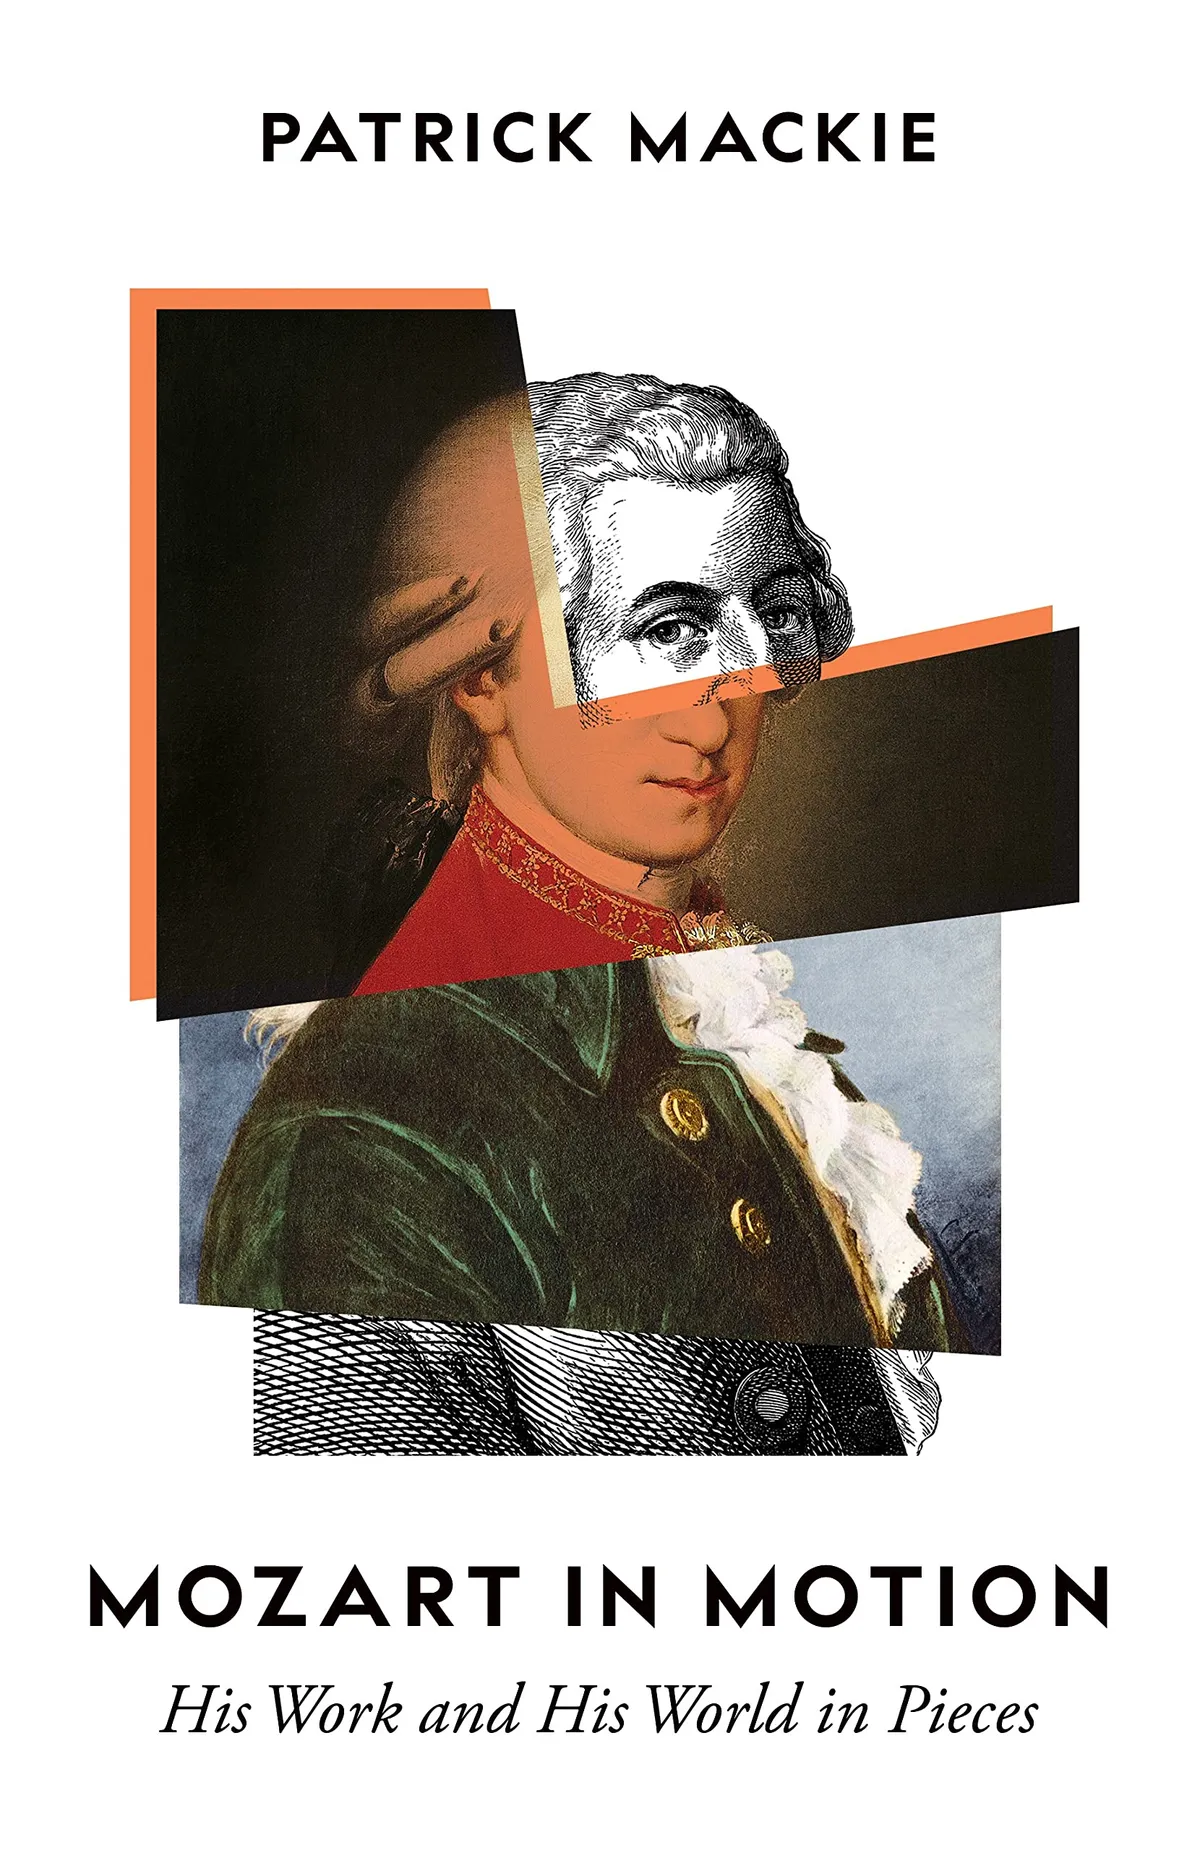 what is the best biography of mozart